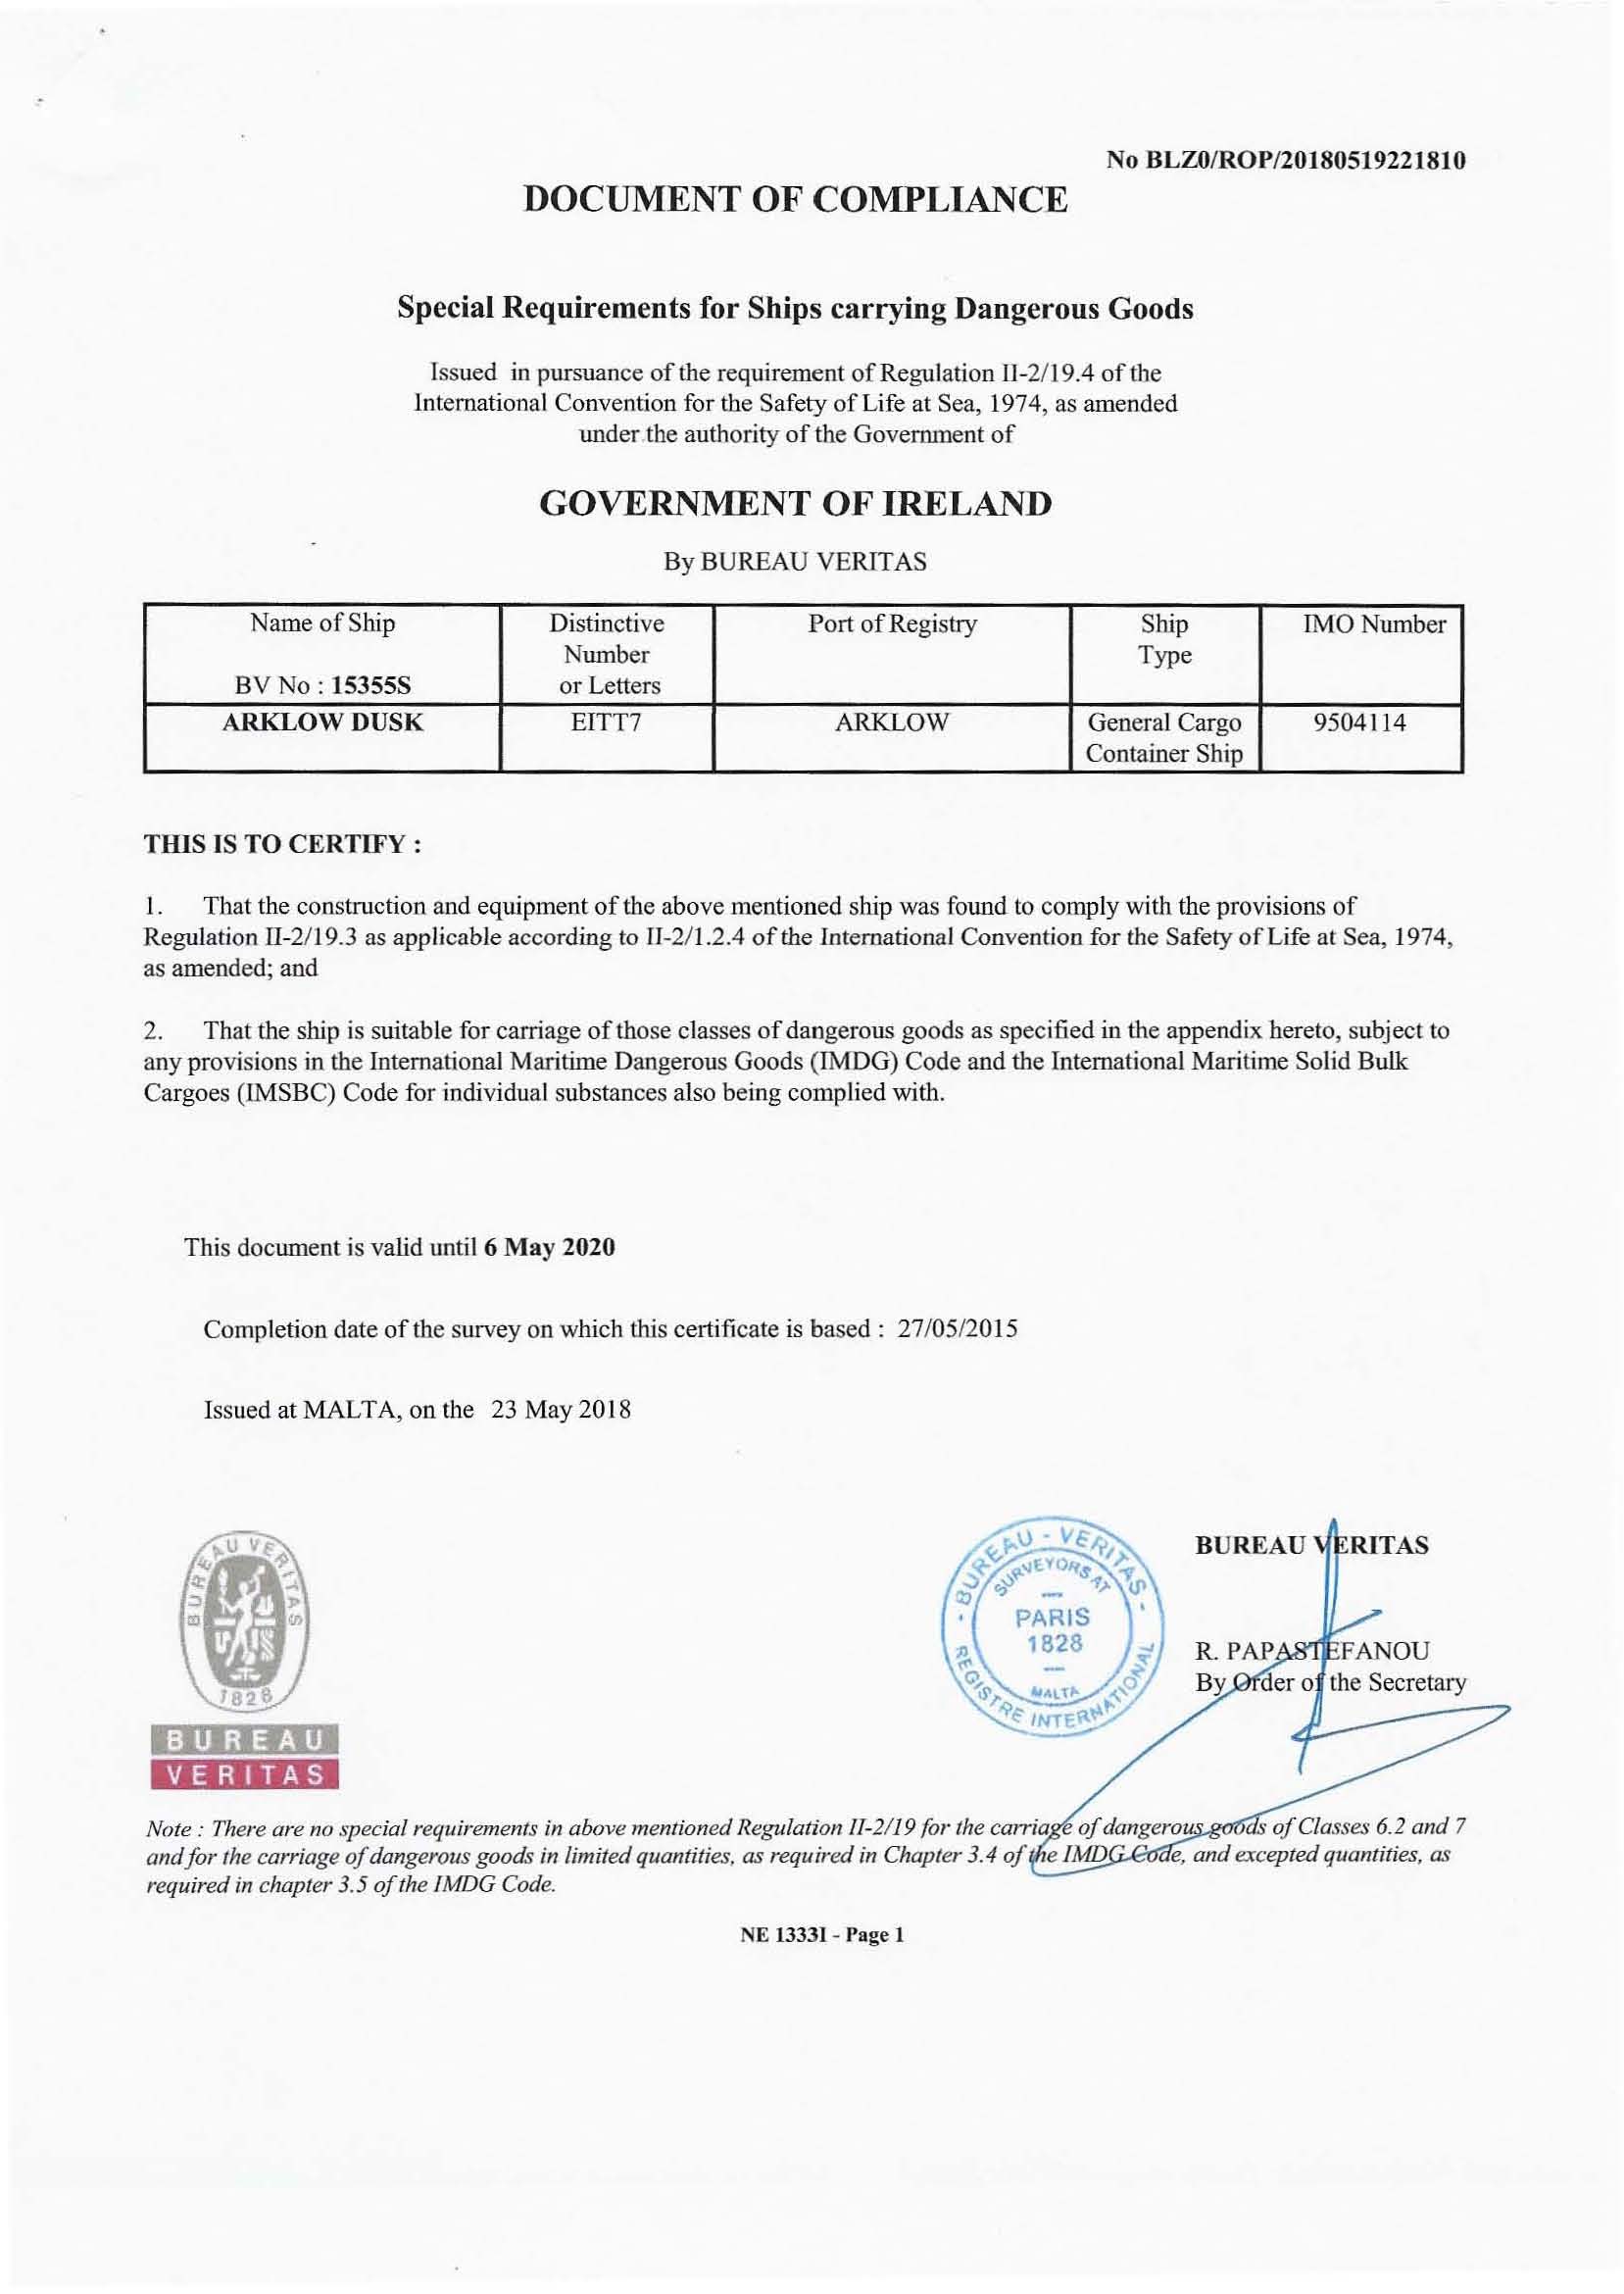 document of compliance for carrying dangerous goods